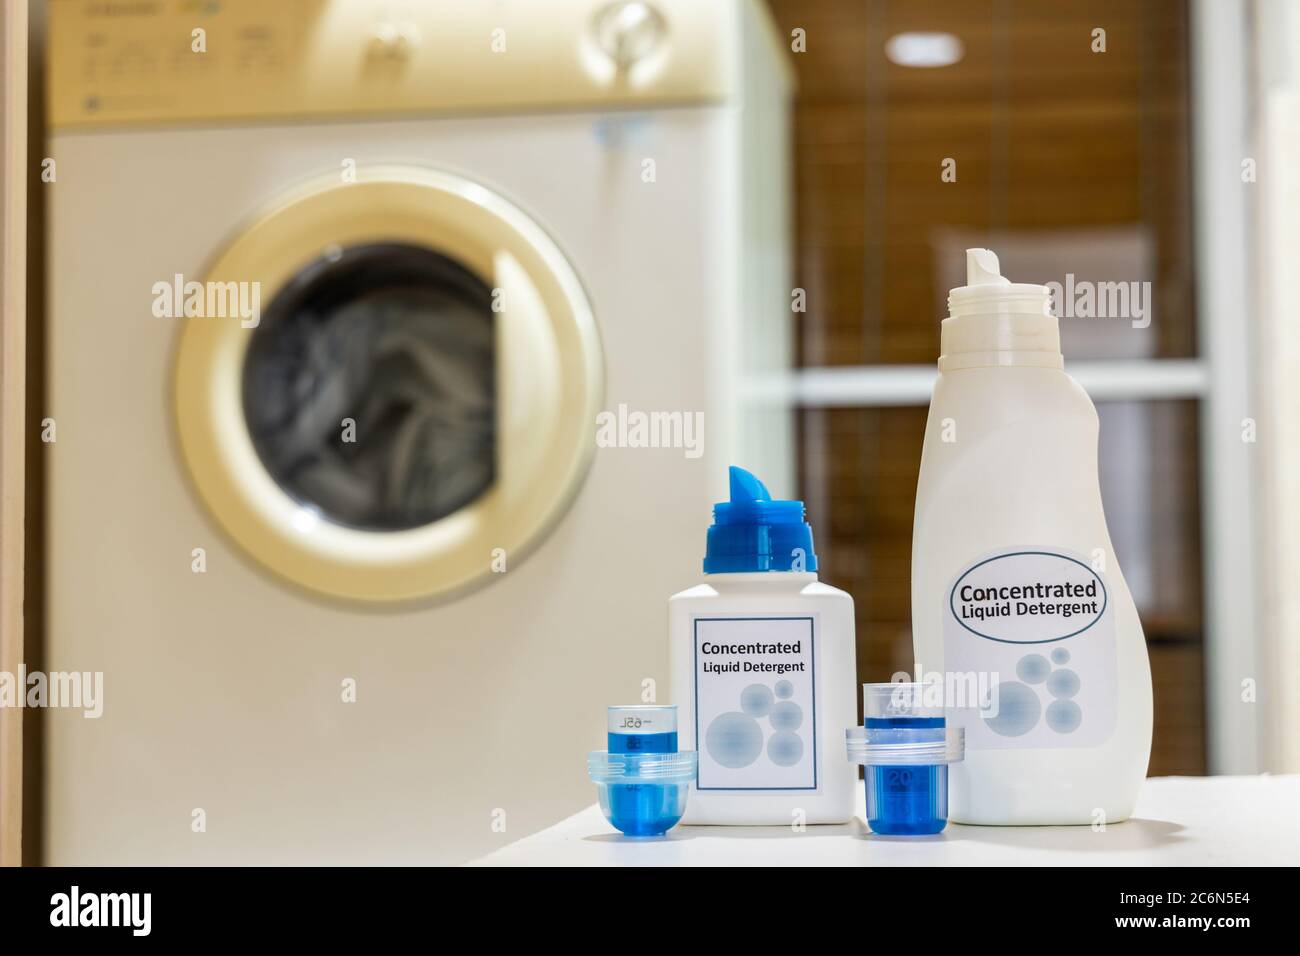 Innovative compact concentrated laundry liquid detergent against washing machine background at home Stock Photo